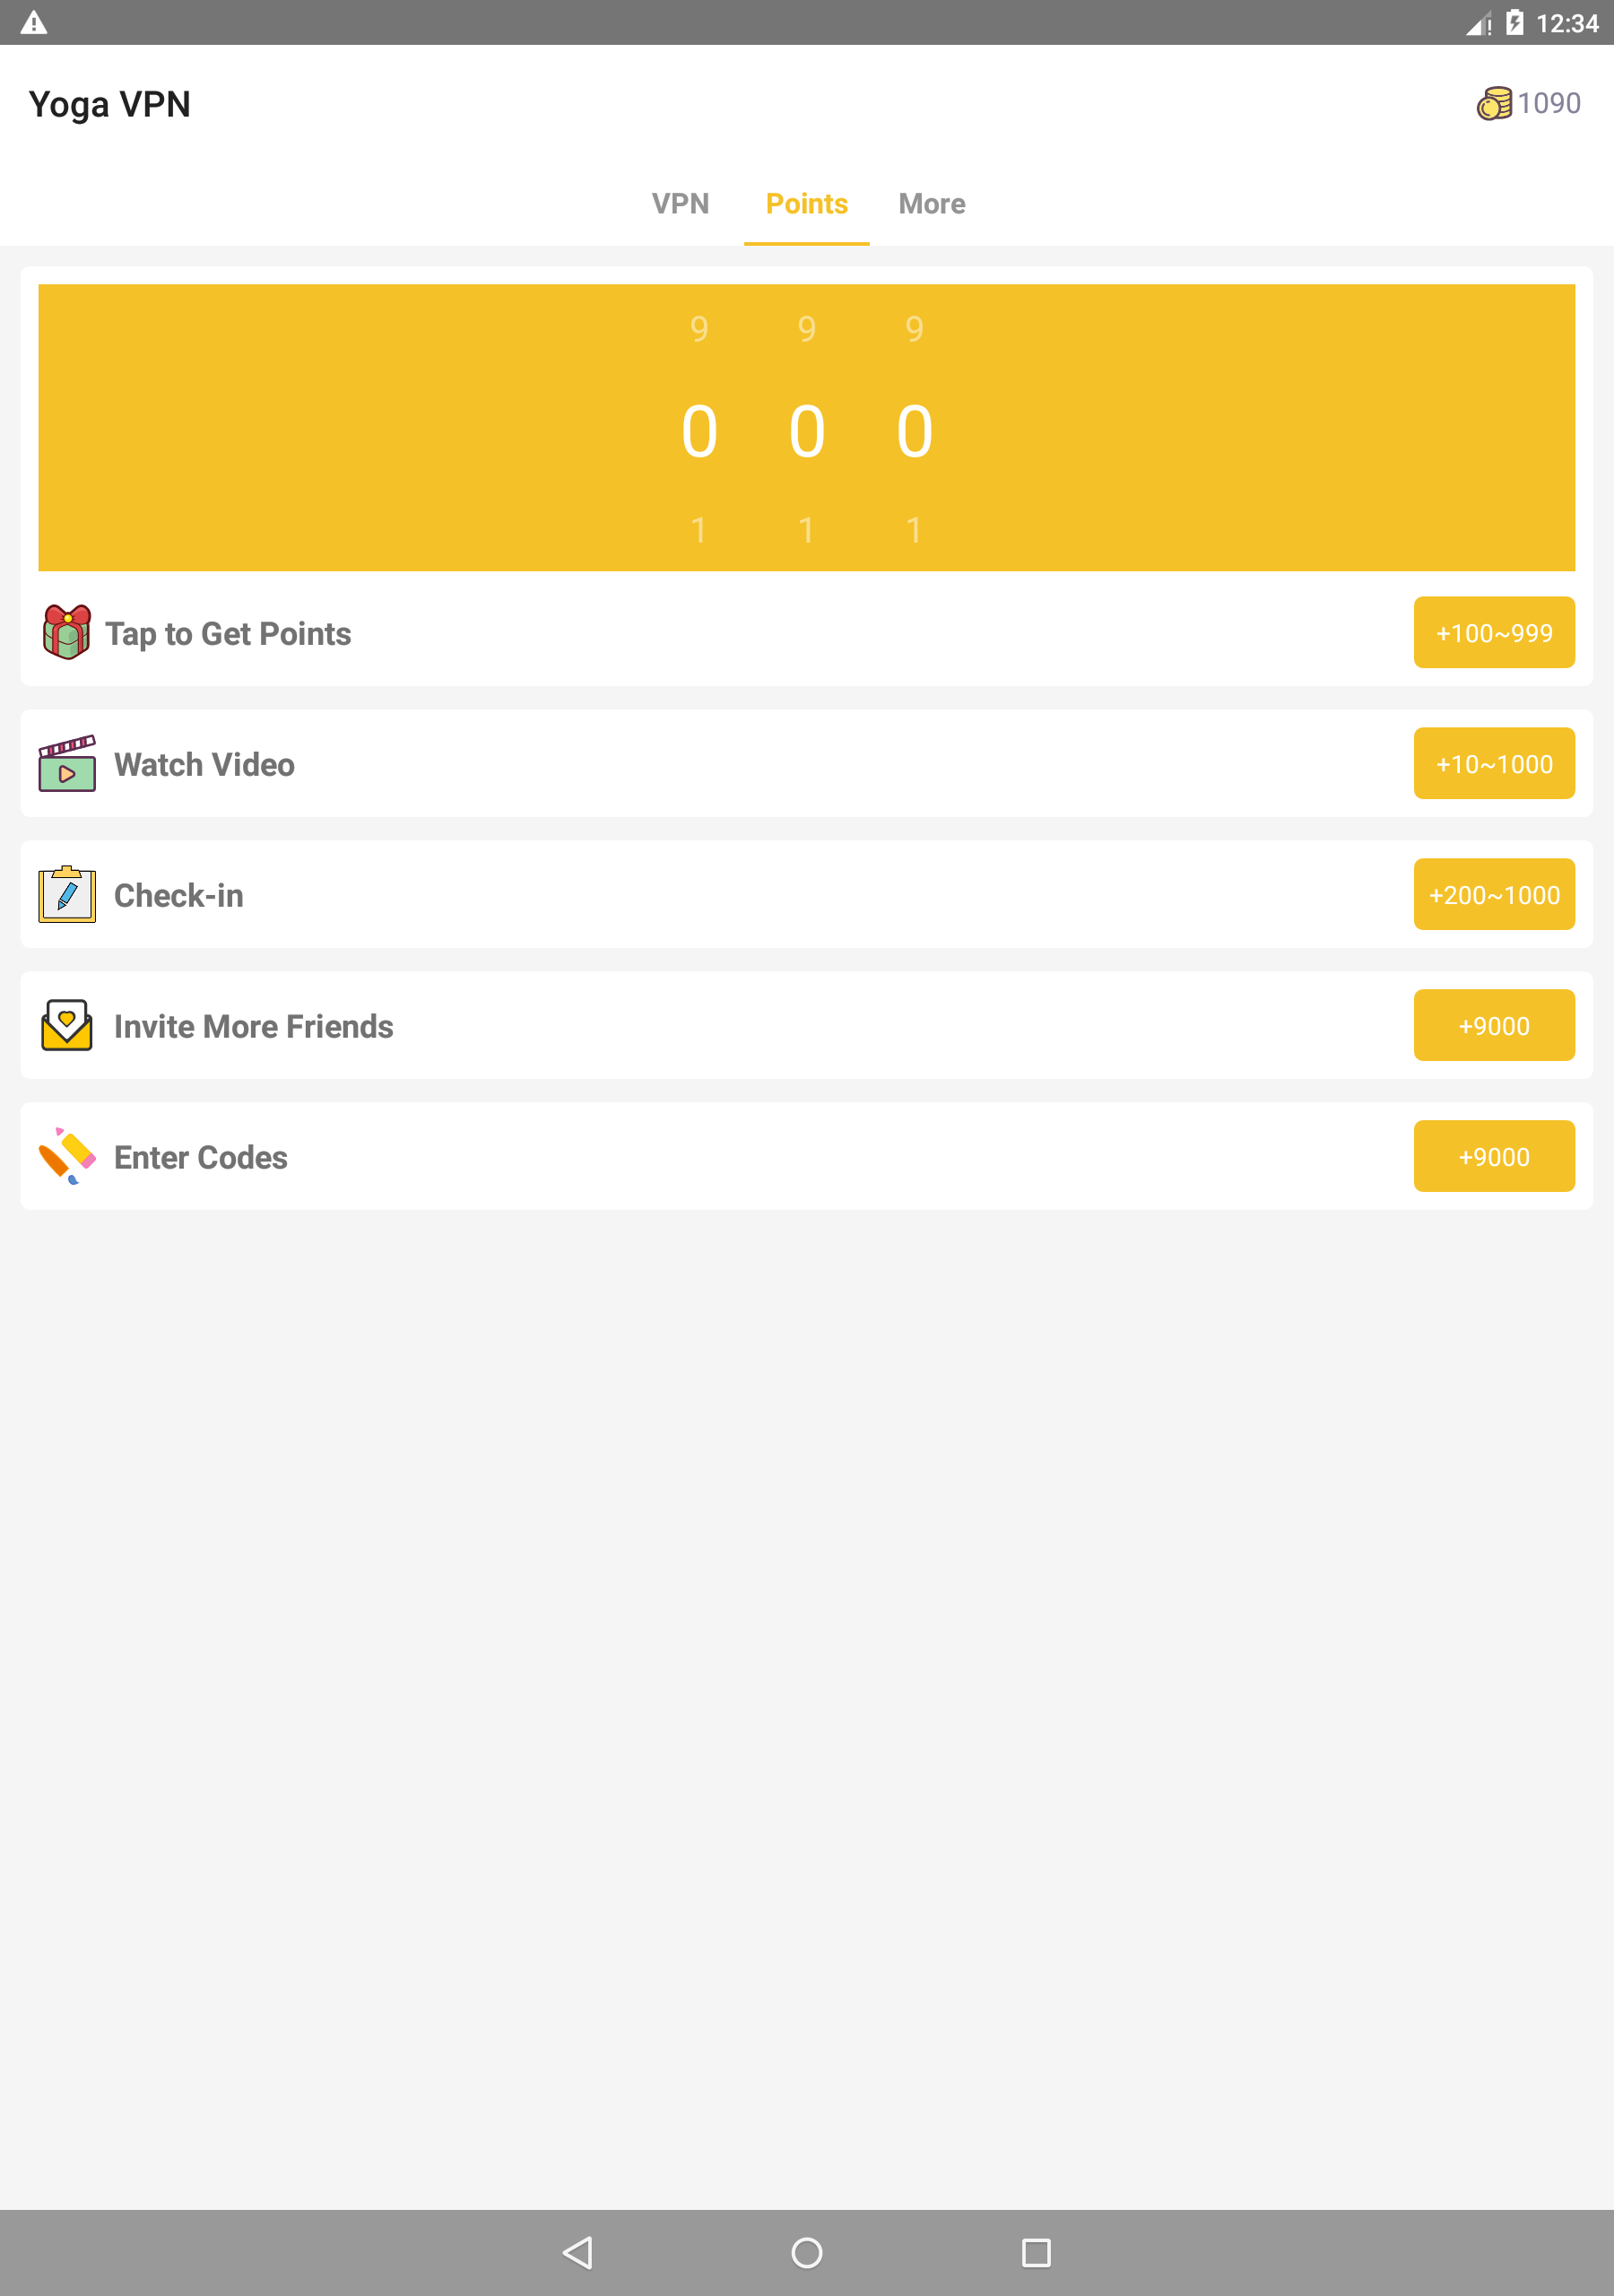 Yoga VPN for Android - APK Download - 